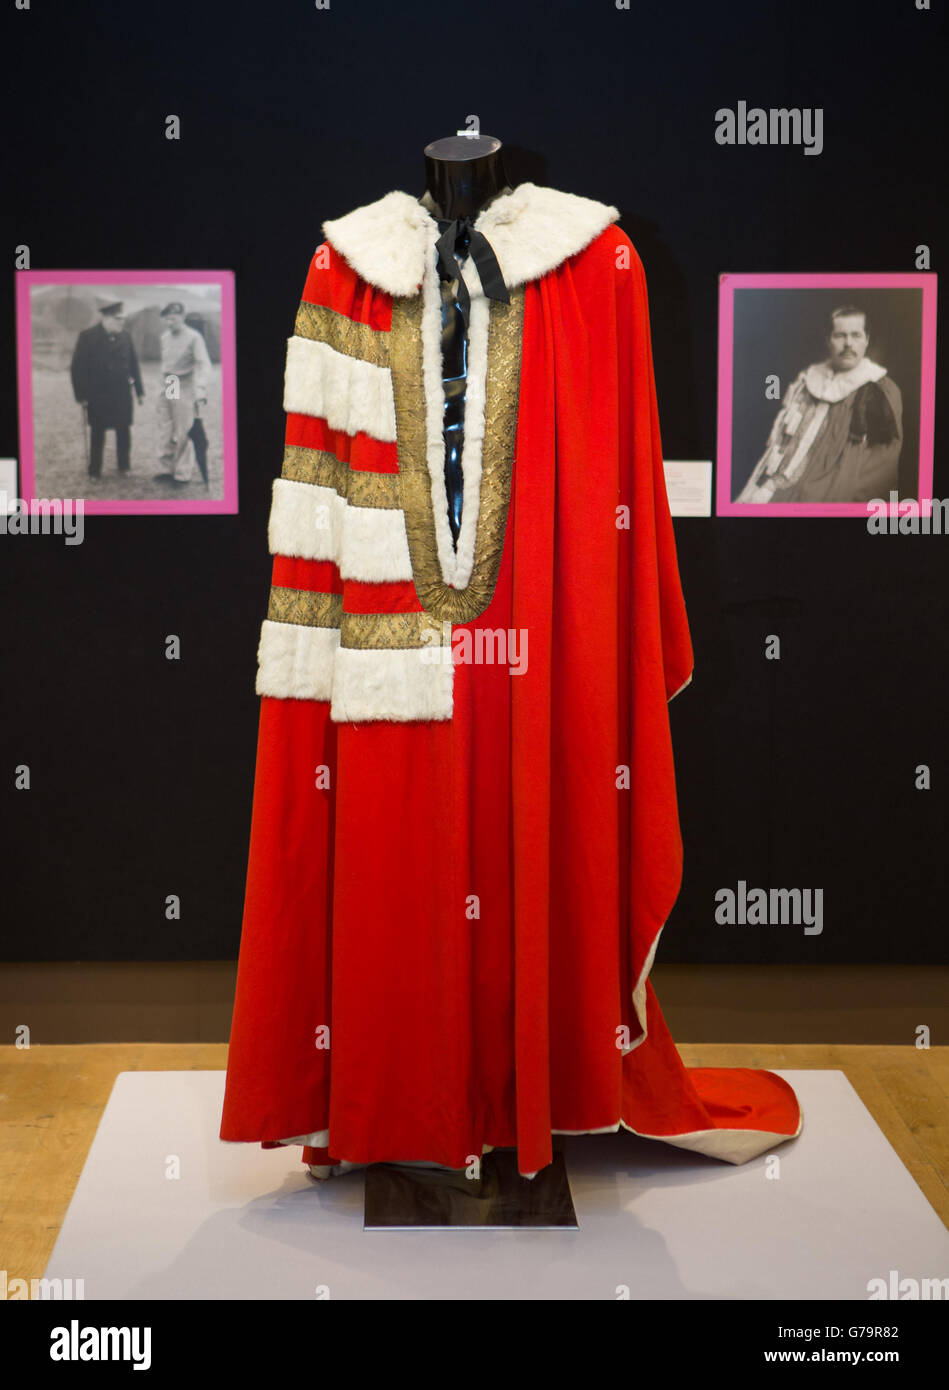 Lord Lucan's parliamentary robe is part of the Famous and Infamous exhibition which includes highlights from the collection of Jersey collector David Gainsborough Roberts at Christie's in London. Stock Photo